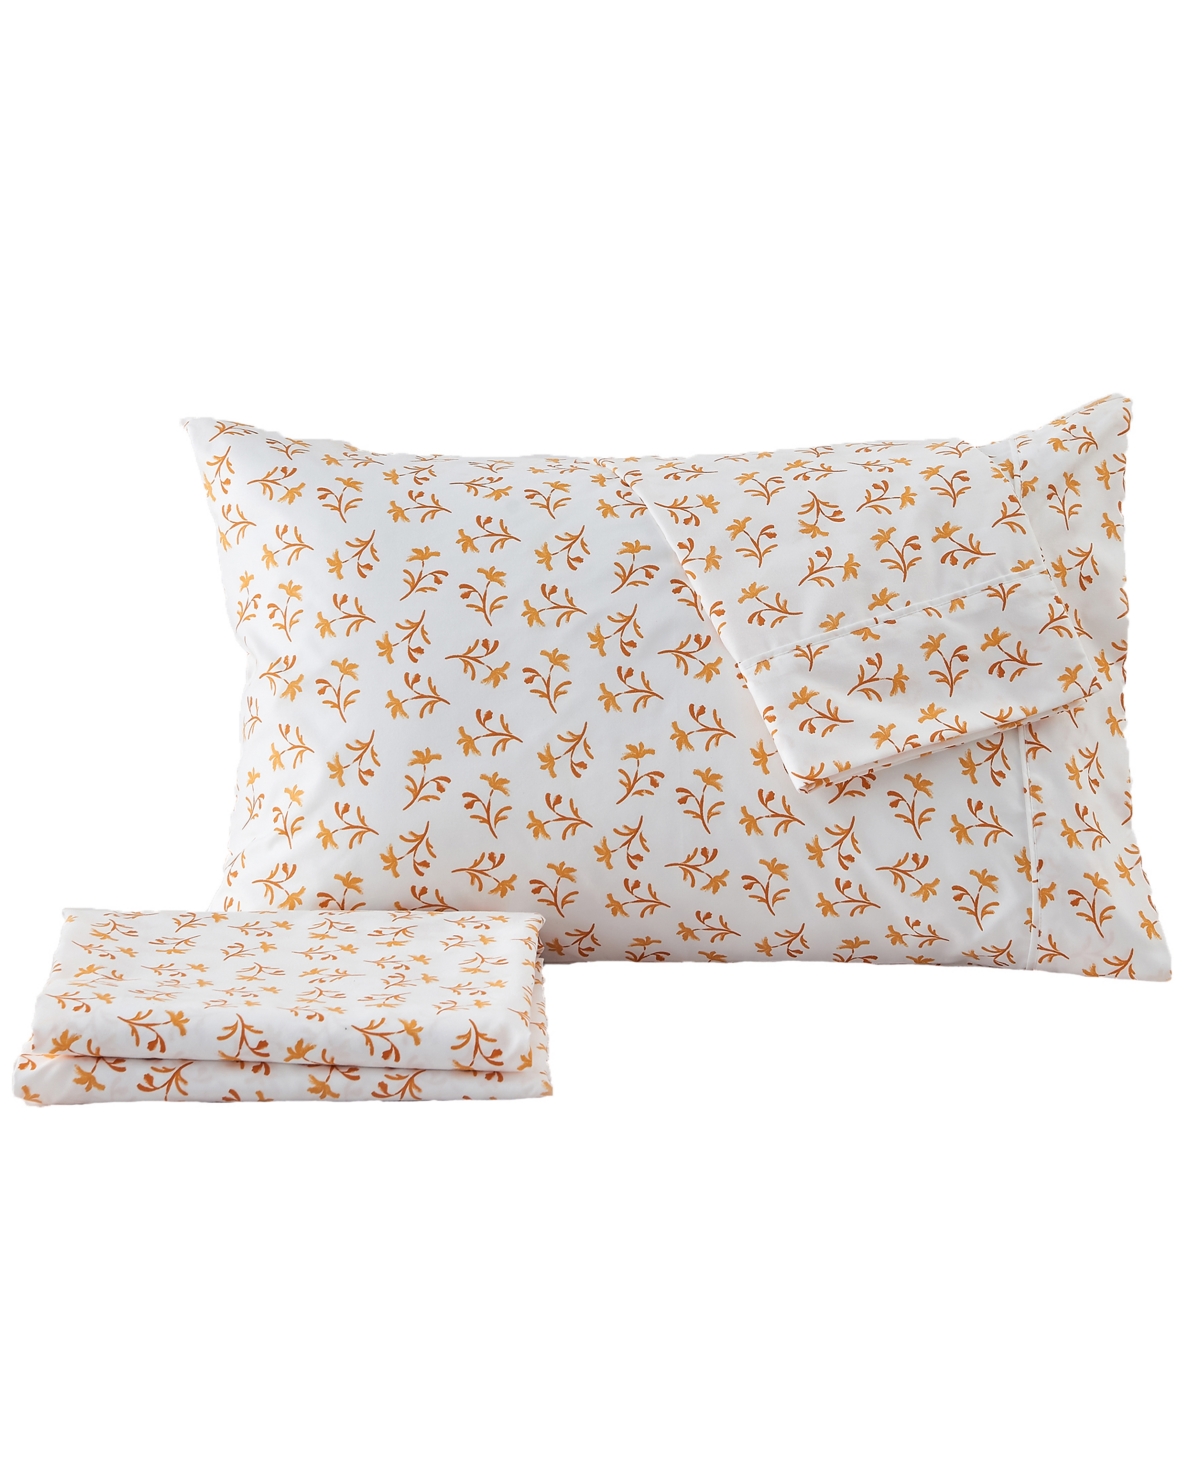 Premium Comforts Floral Microfiber Printed 4 Piece Sheet Set, Queen In Small Watercolor Flowers